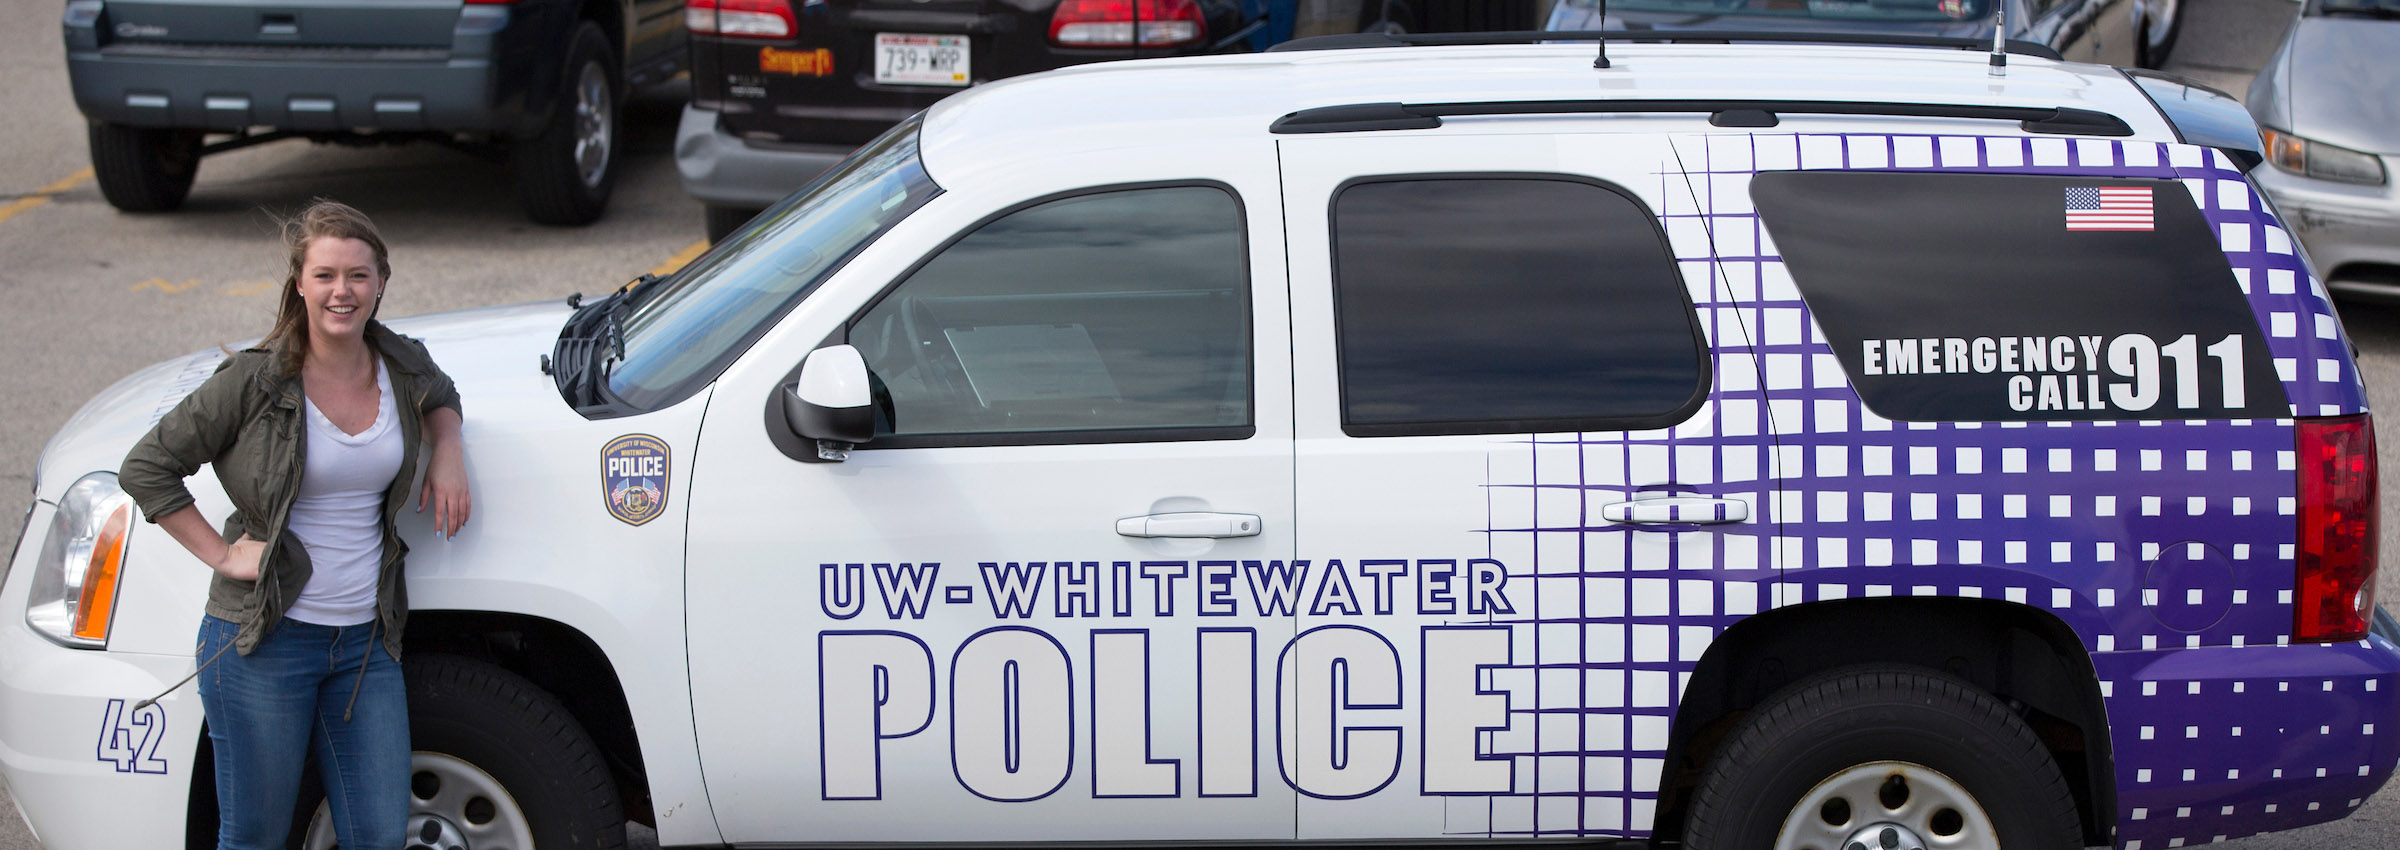 Student information from the UW-Whitewater Police Department